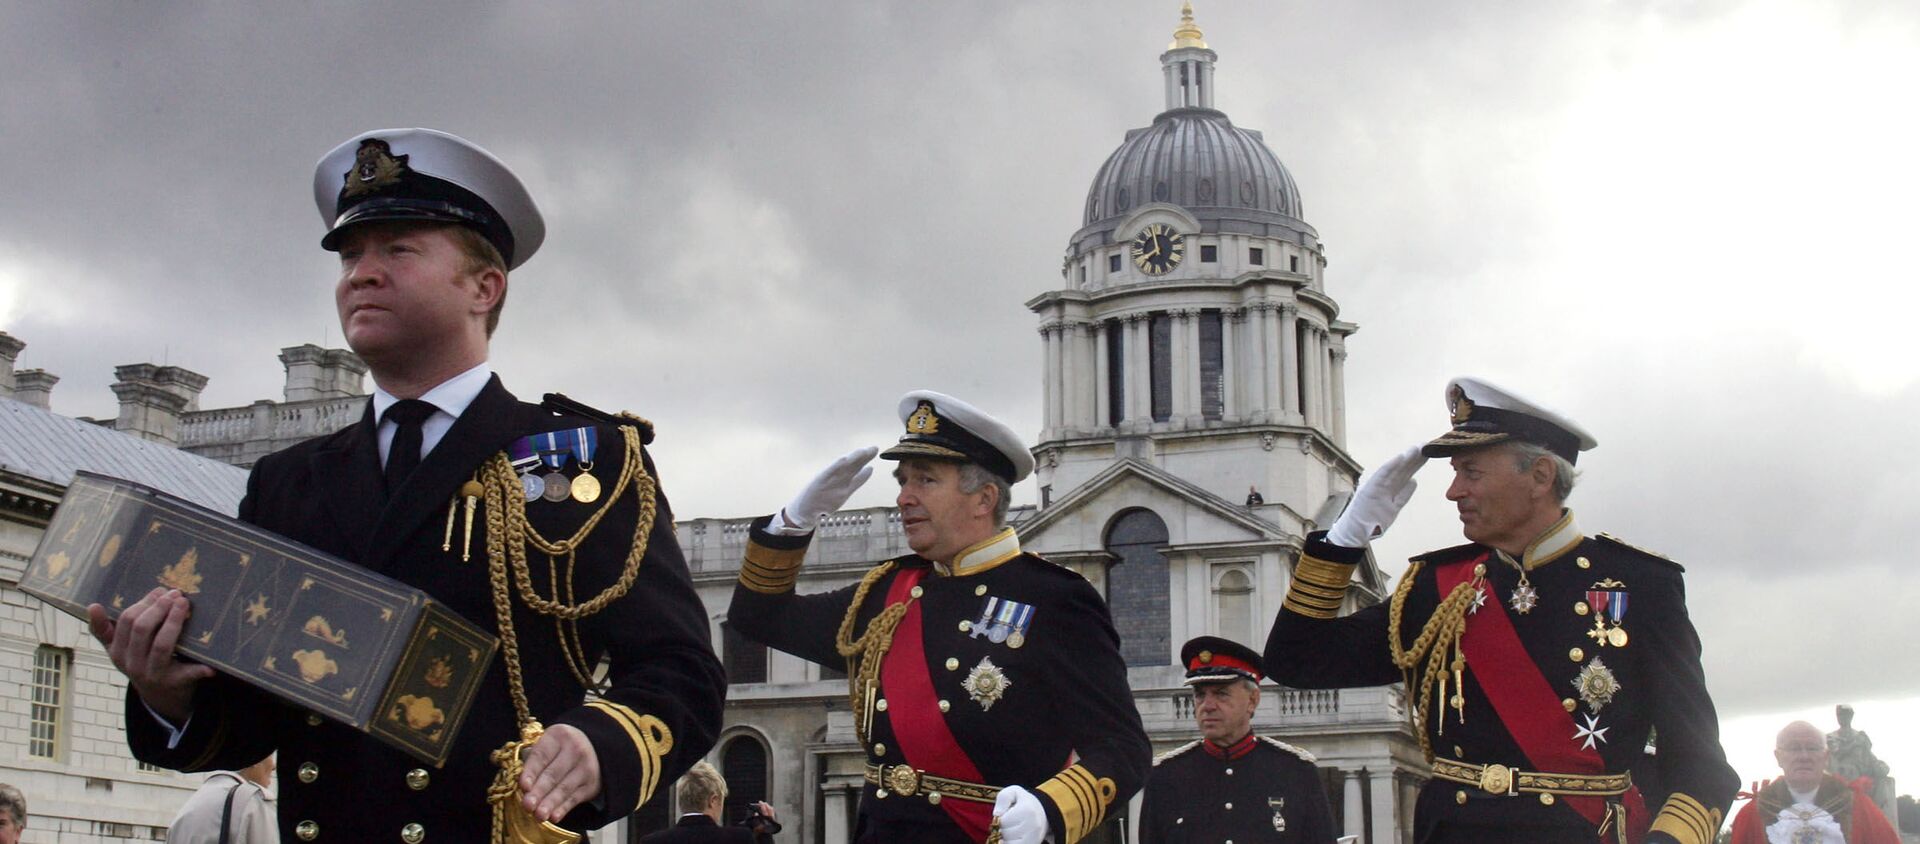 Officers from the Royal Navy re-enact the funeral of Britain's greatest naval hero, Admiral Horatio Nelson during a ceremony at the Maritime Museum in Greenwich, London, Friday, Sept, 16, 2005.  - Sputnik International, 1920, 12.03.2021